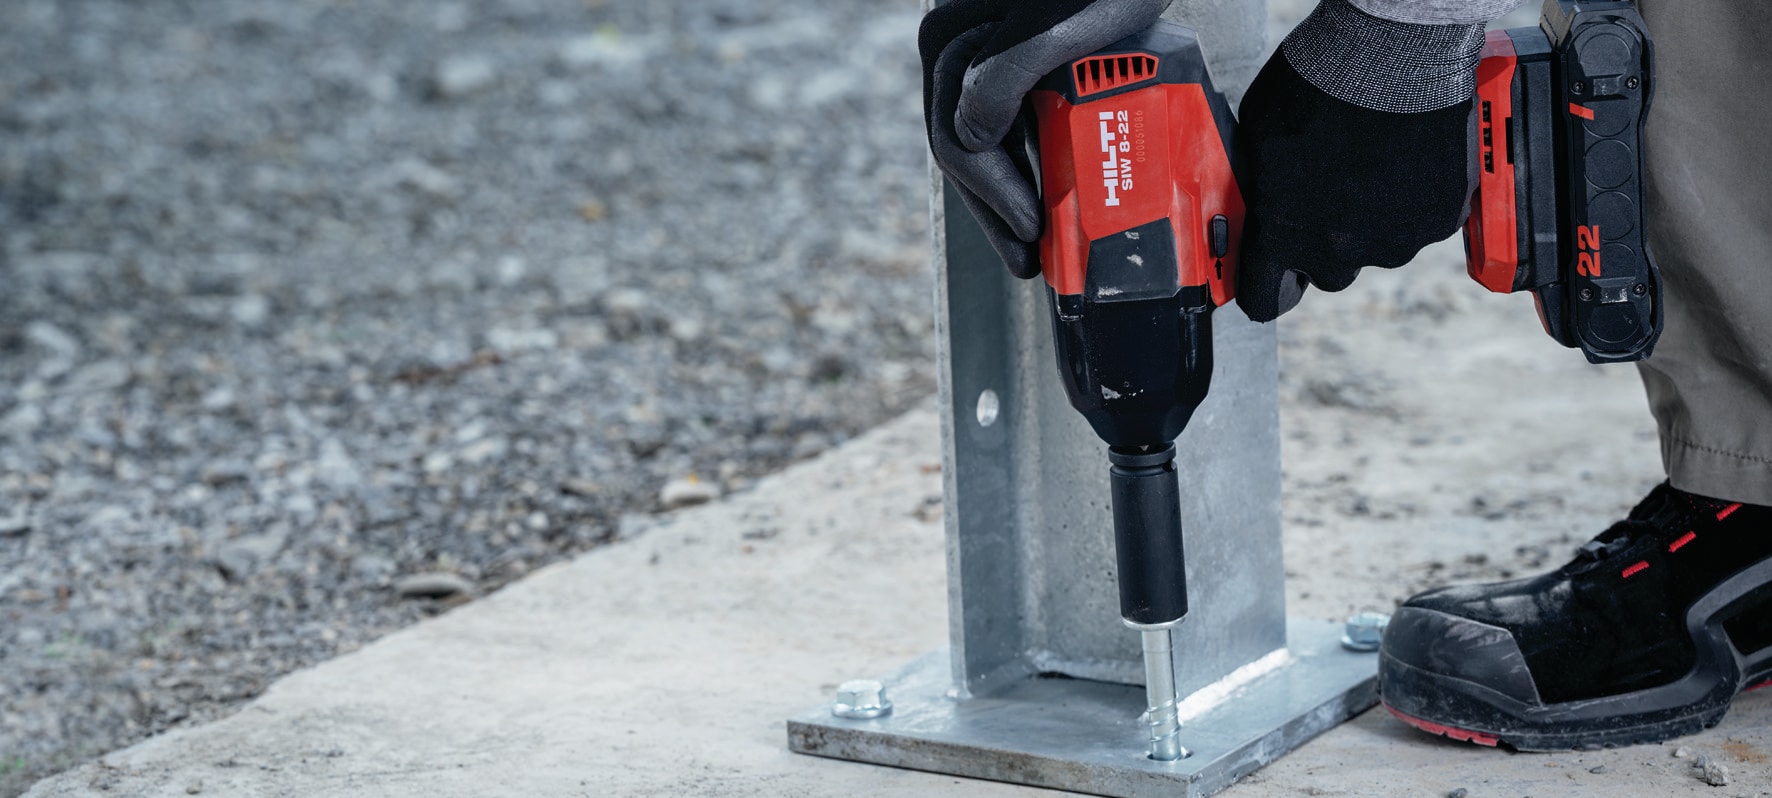 SIW 8-22 ½” Cordless impact wrench - Impact drivers and wrenches